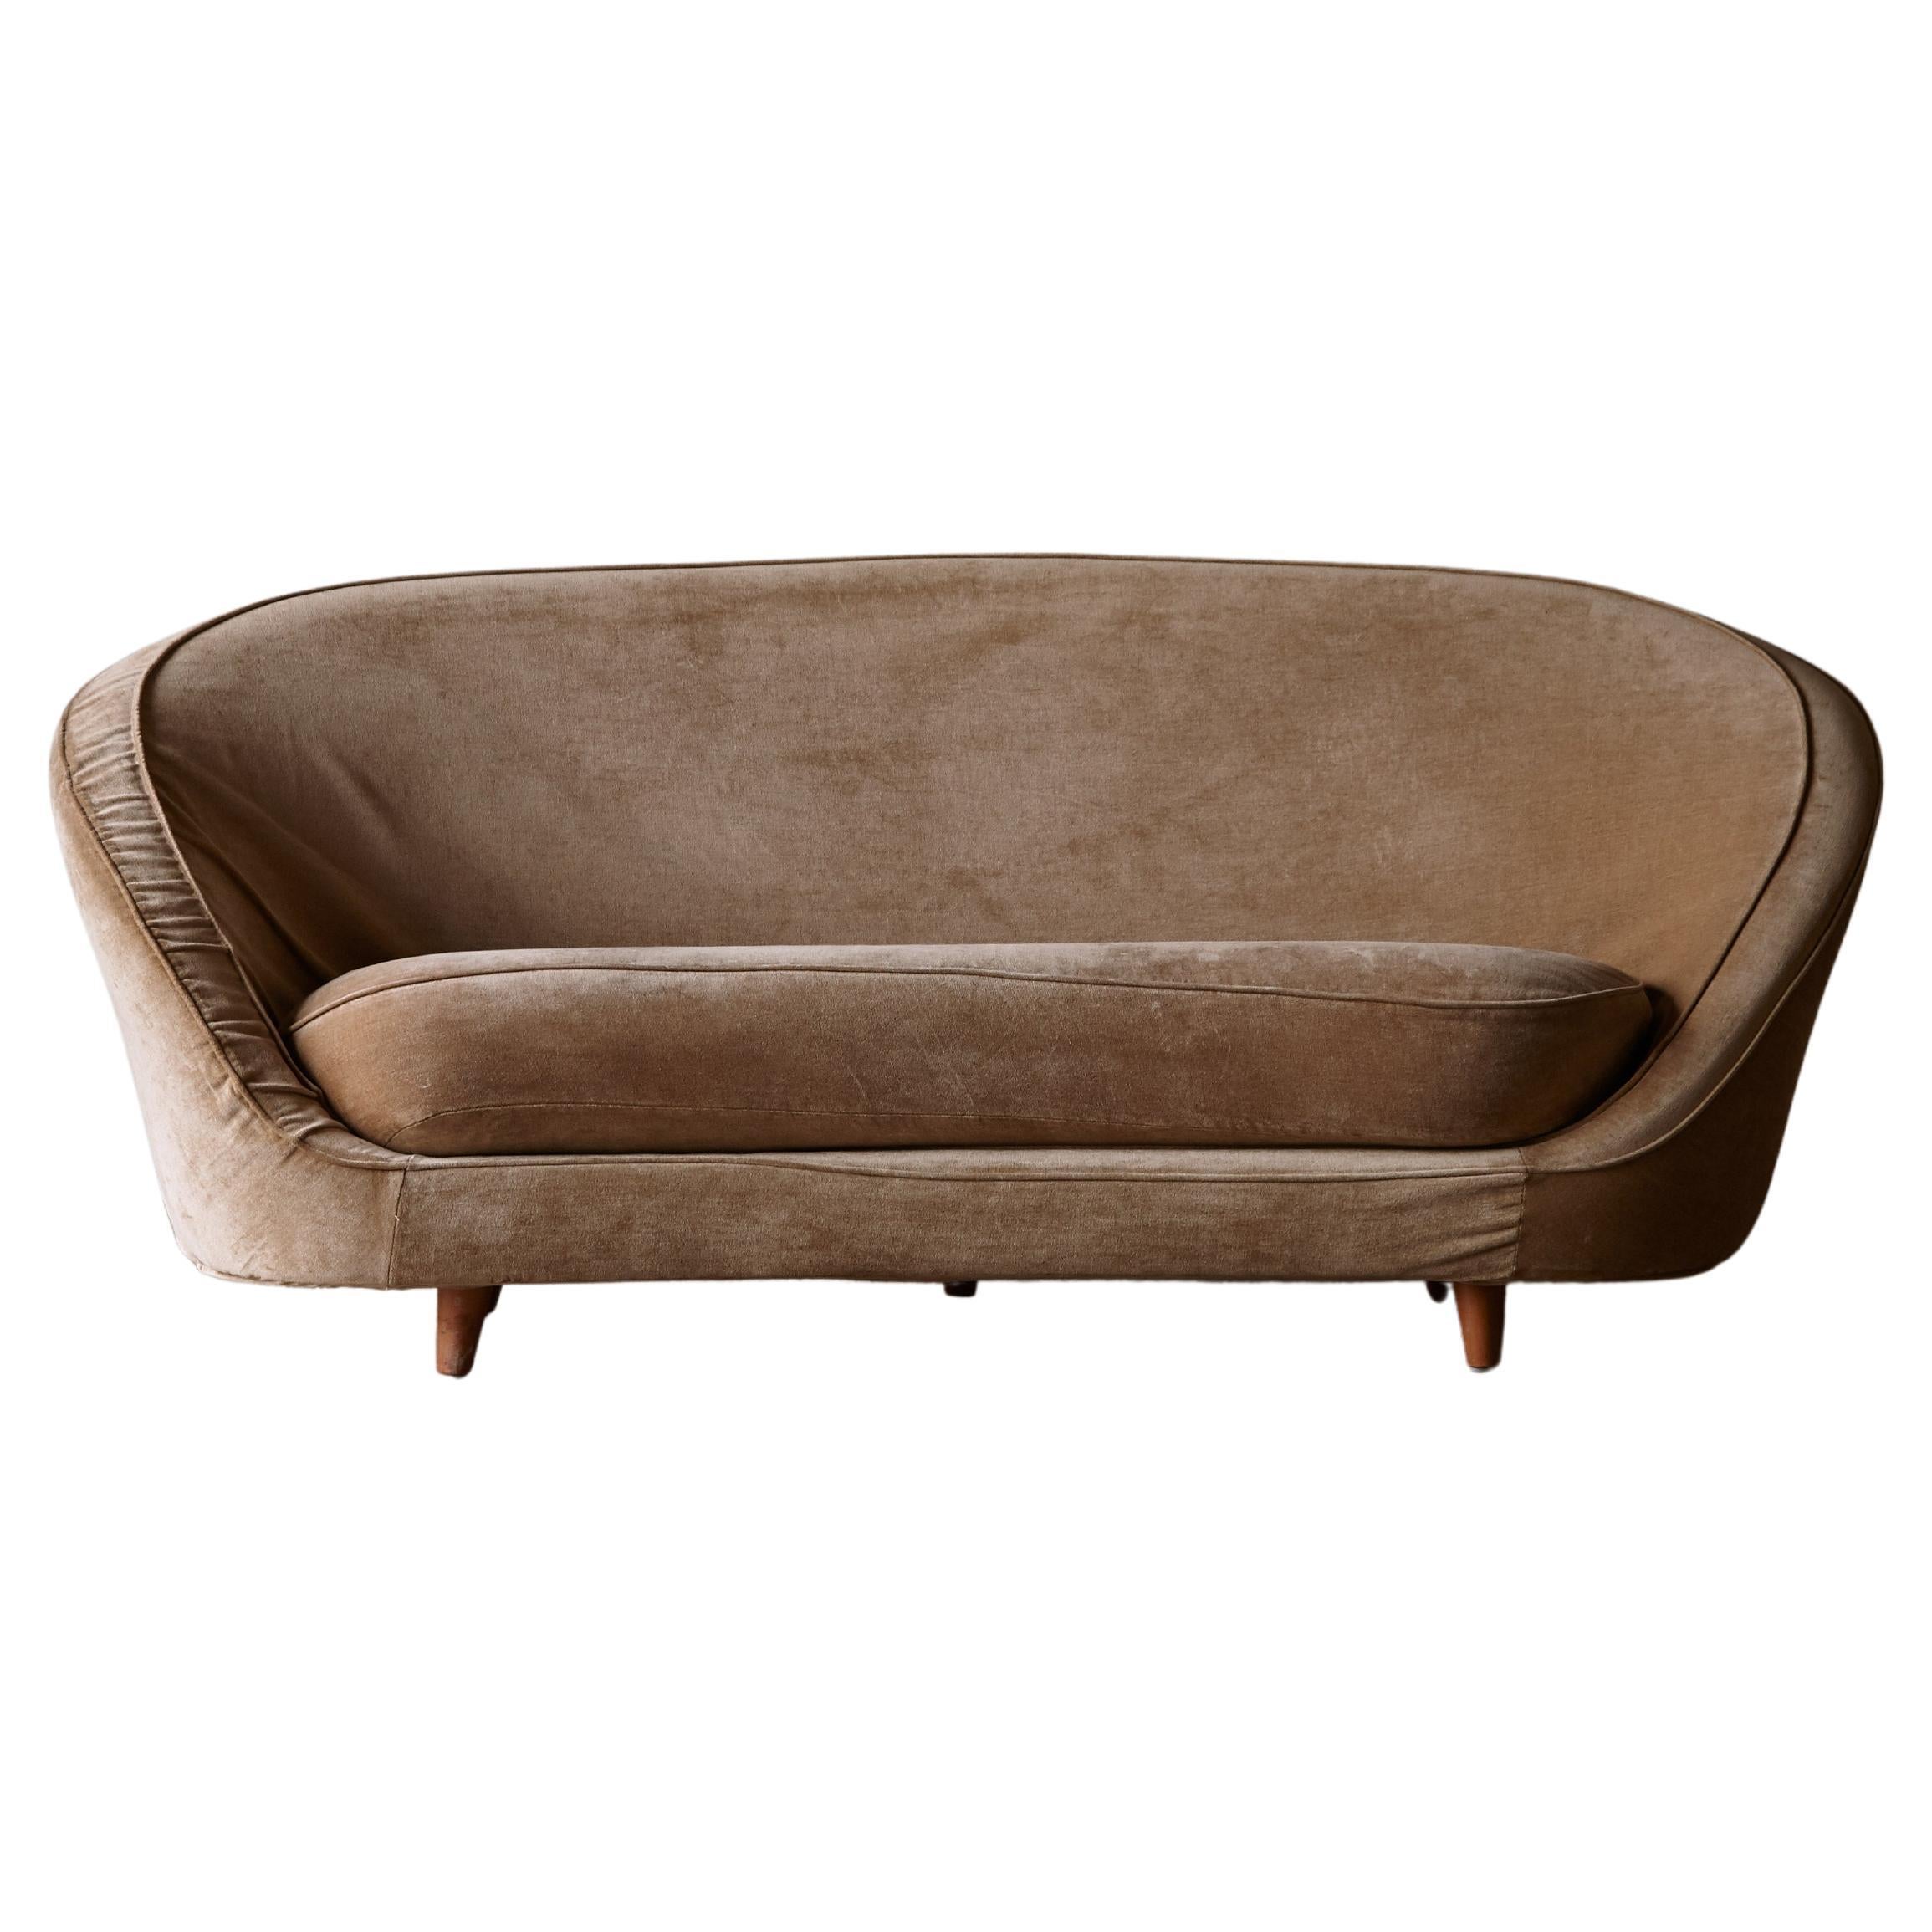 Curved Egg Shape Sofa, in the Style of Ico Parisi, Italy, 1950s / 60s